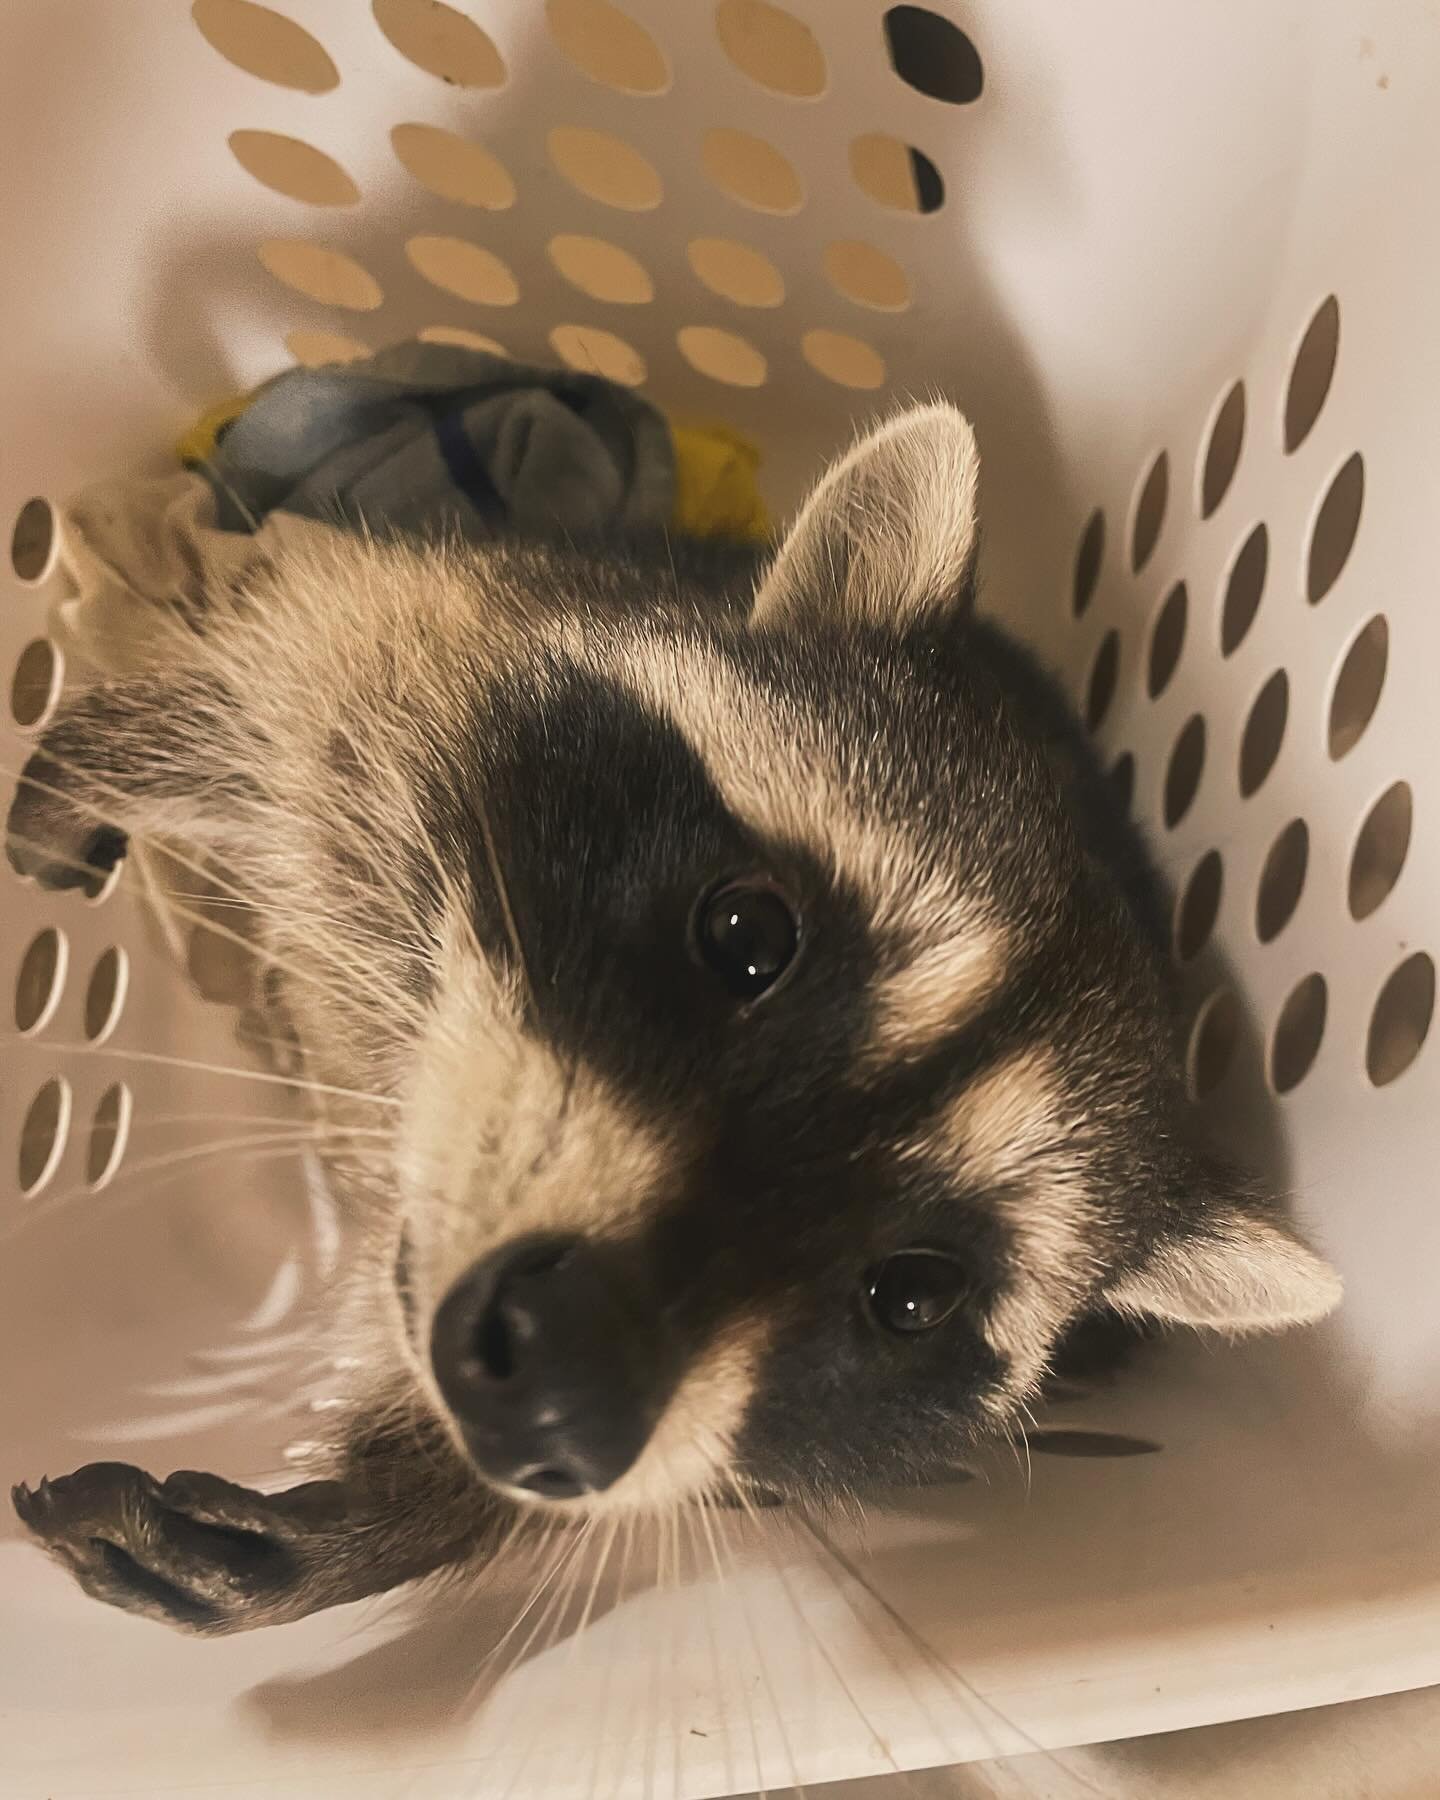 Happy Mother&rsquo;s Day Yeti!

In a hilarious turn of events our resident raccoon who was brought to us by a wild life rescue team and assured us was male, has in fact delivered babies inside our well house this past week. 

While Yeti is quite soci